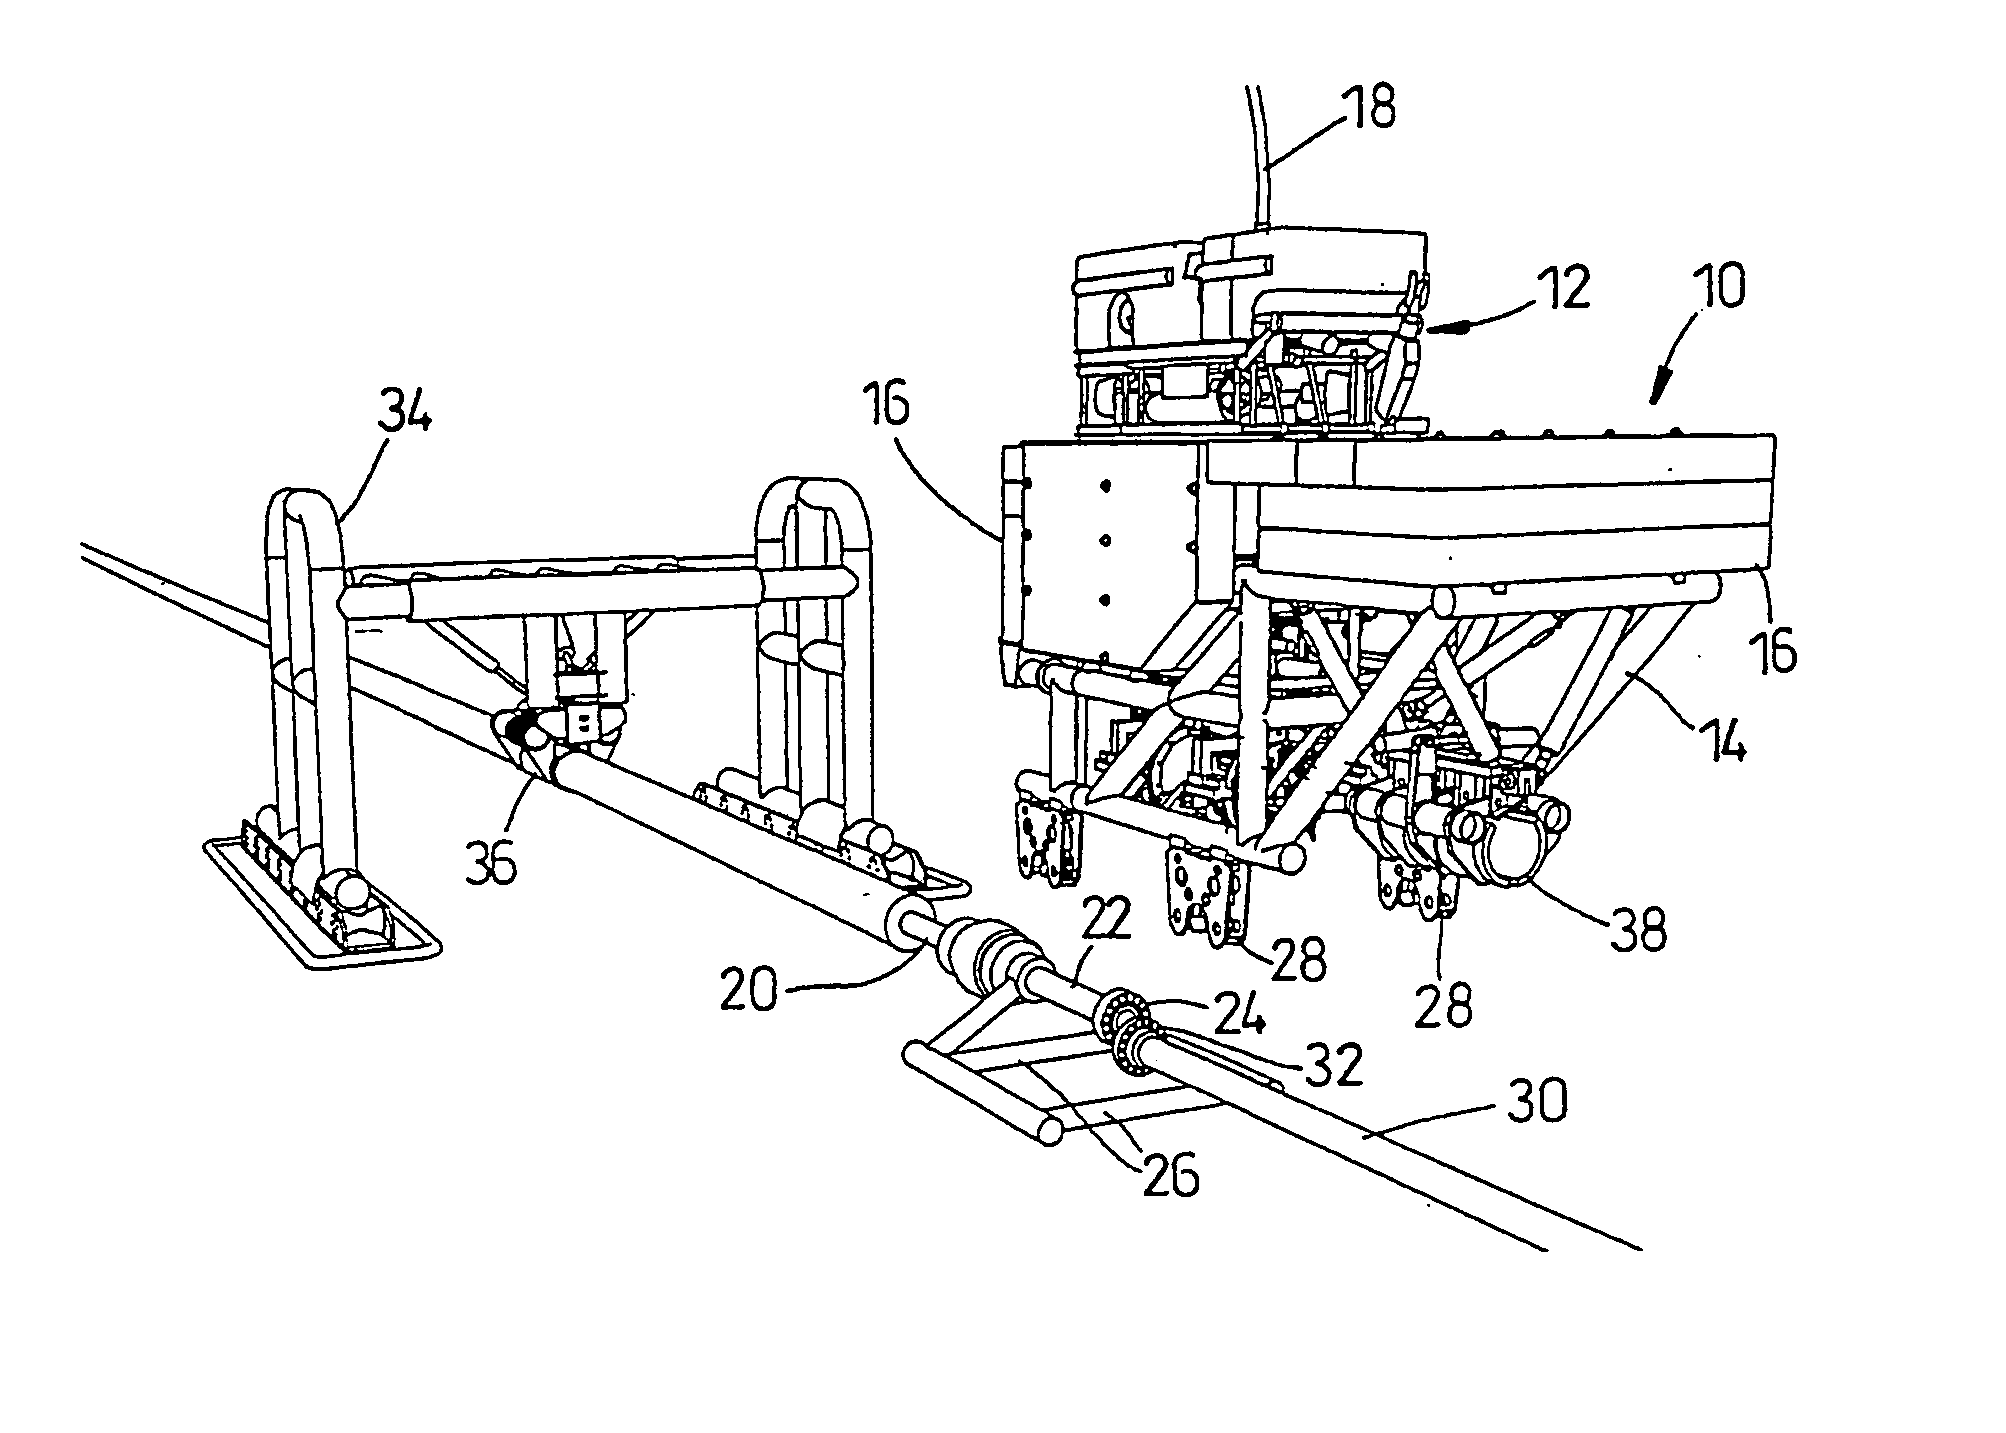 Remote bolted flange connection apparatus and methods of operation thereof